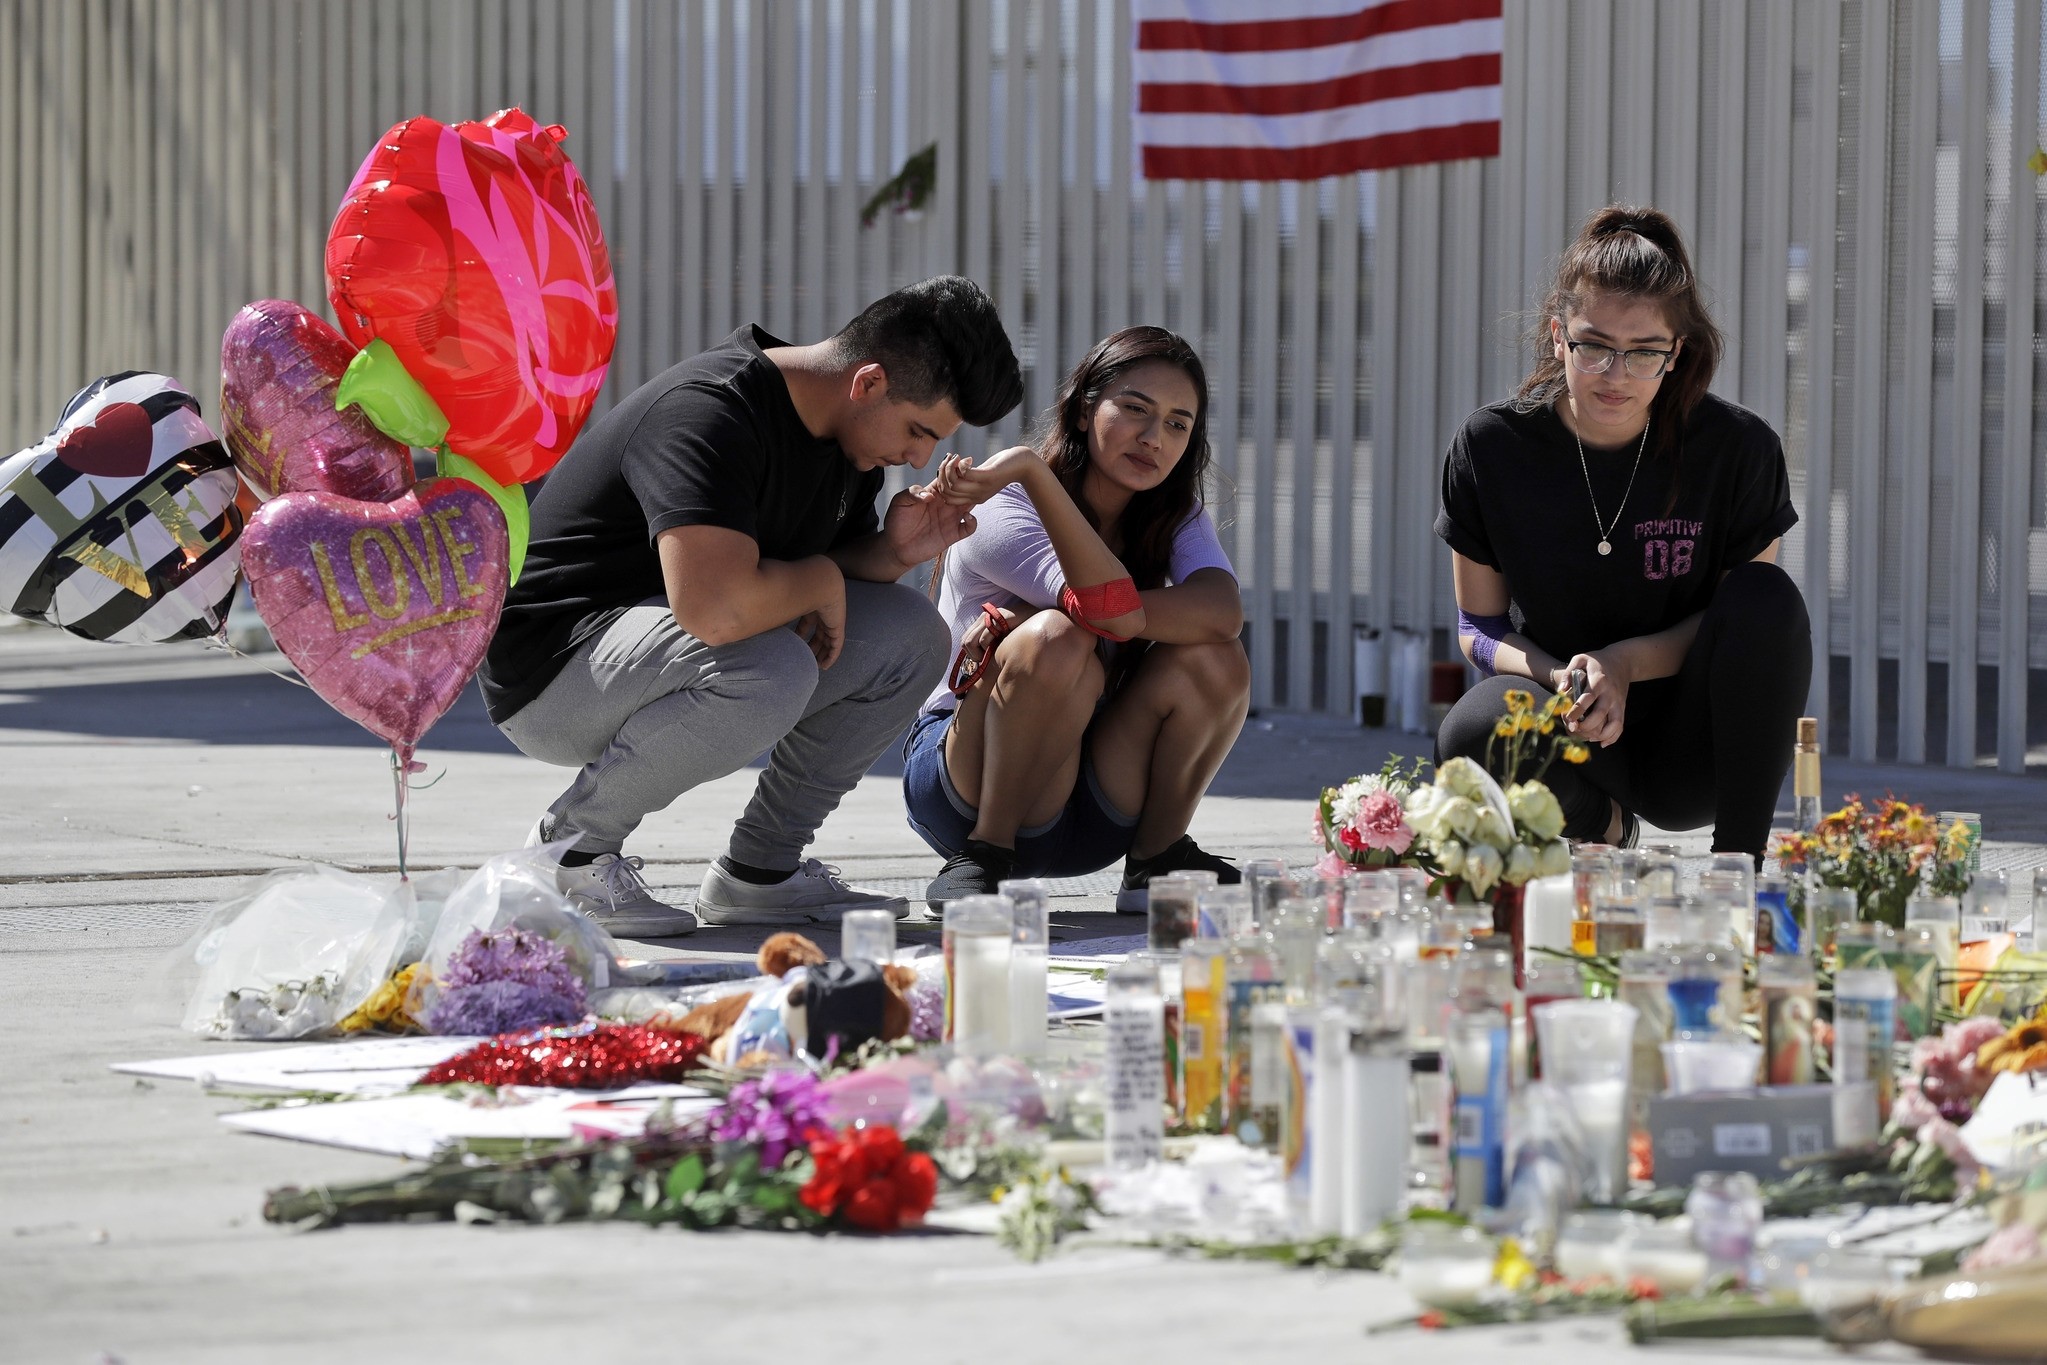 Roberto Lopez, from left, Briana Calderon and Cynthia Olvera, of Las Vegas, pause at a memorial site on Tuesday, Oct. 3, 2017 in Las Vegas. (AP Photo)